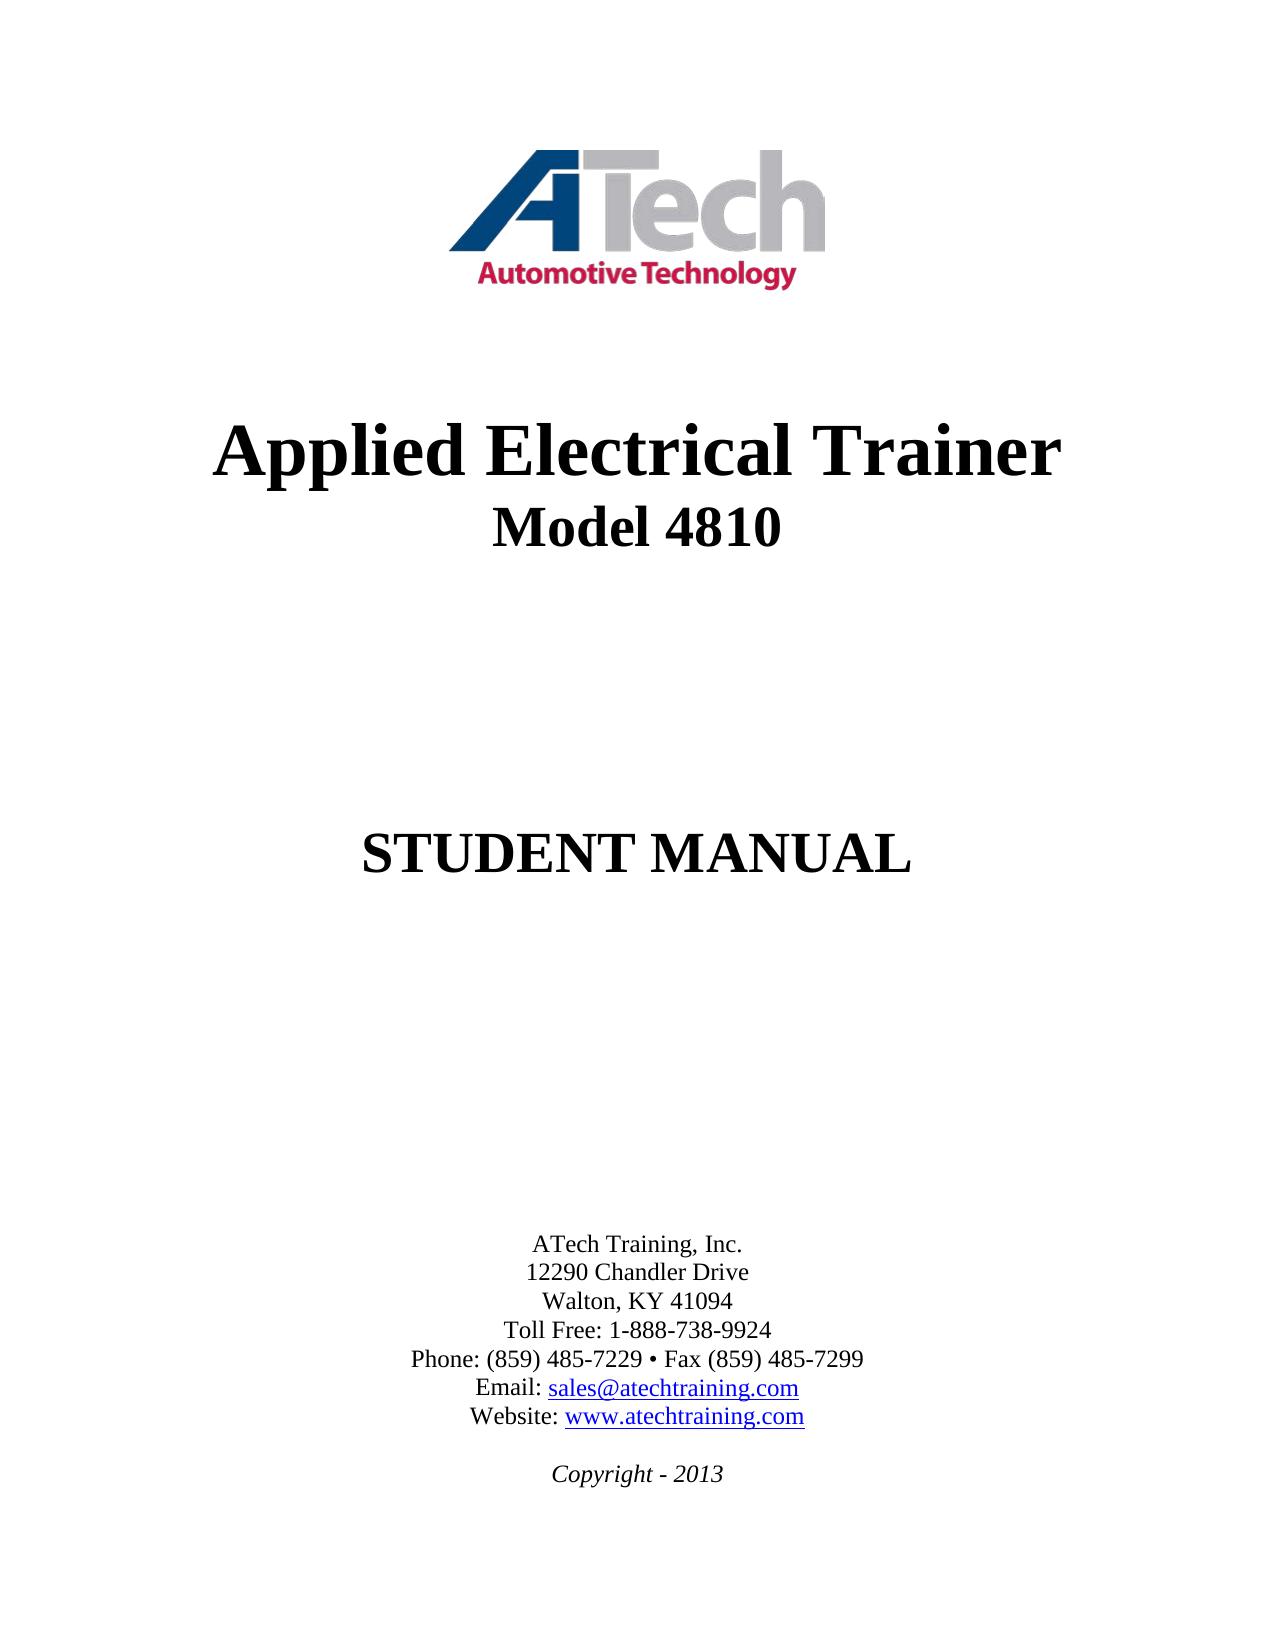 Applied Electrical Trainer Outline